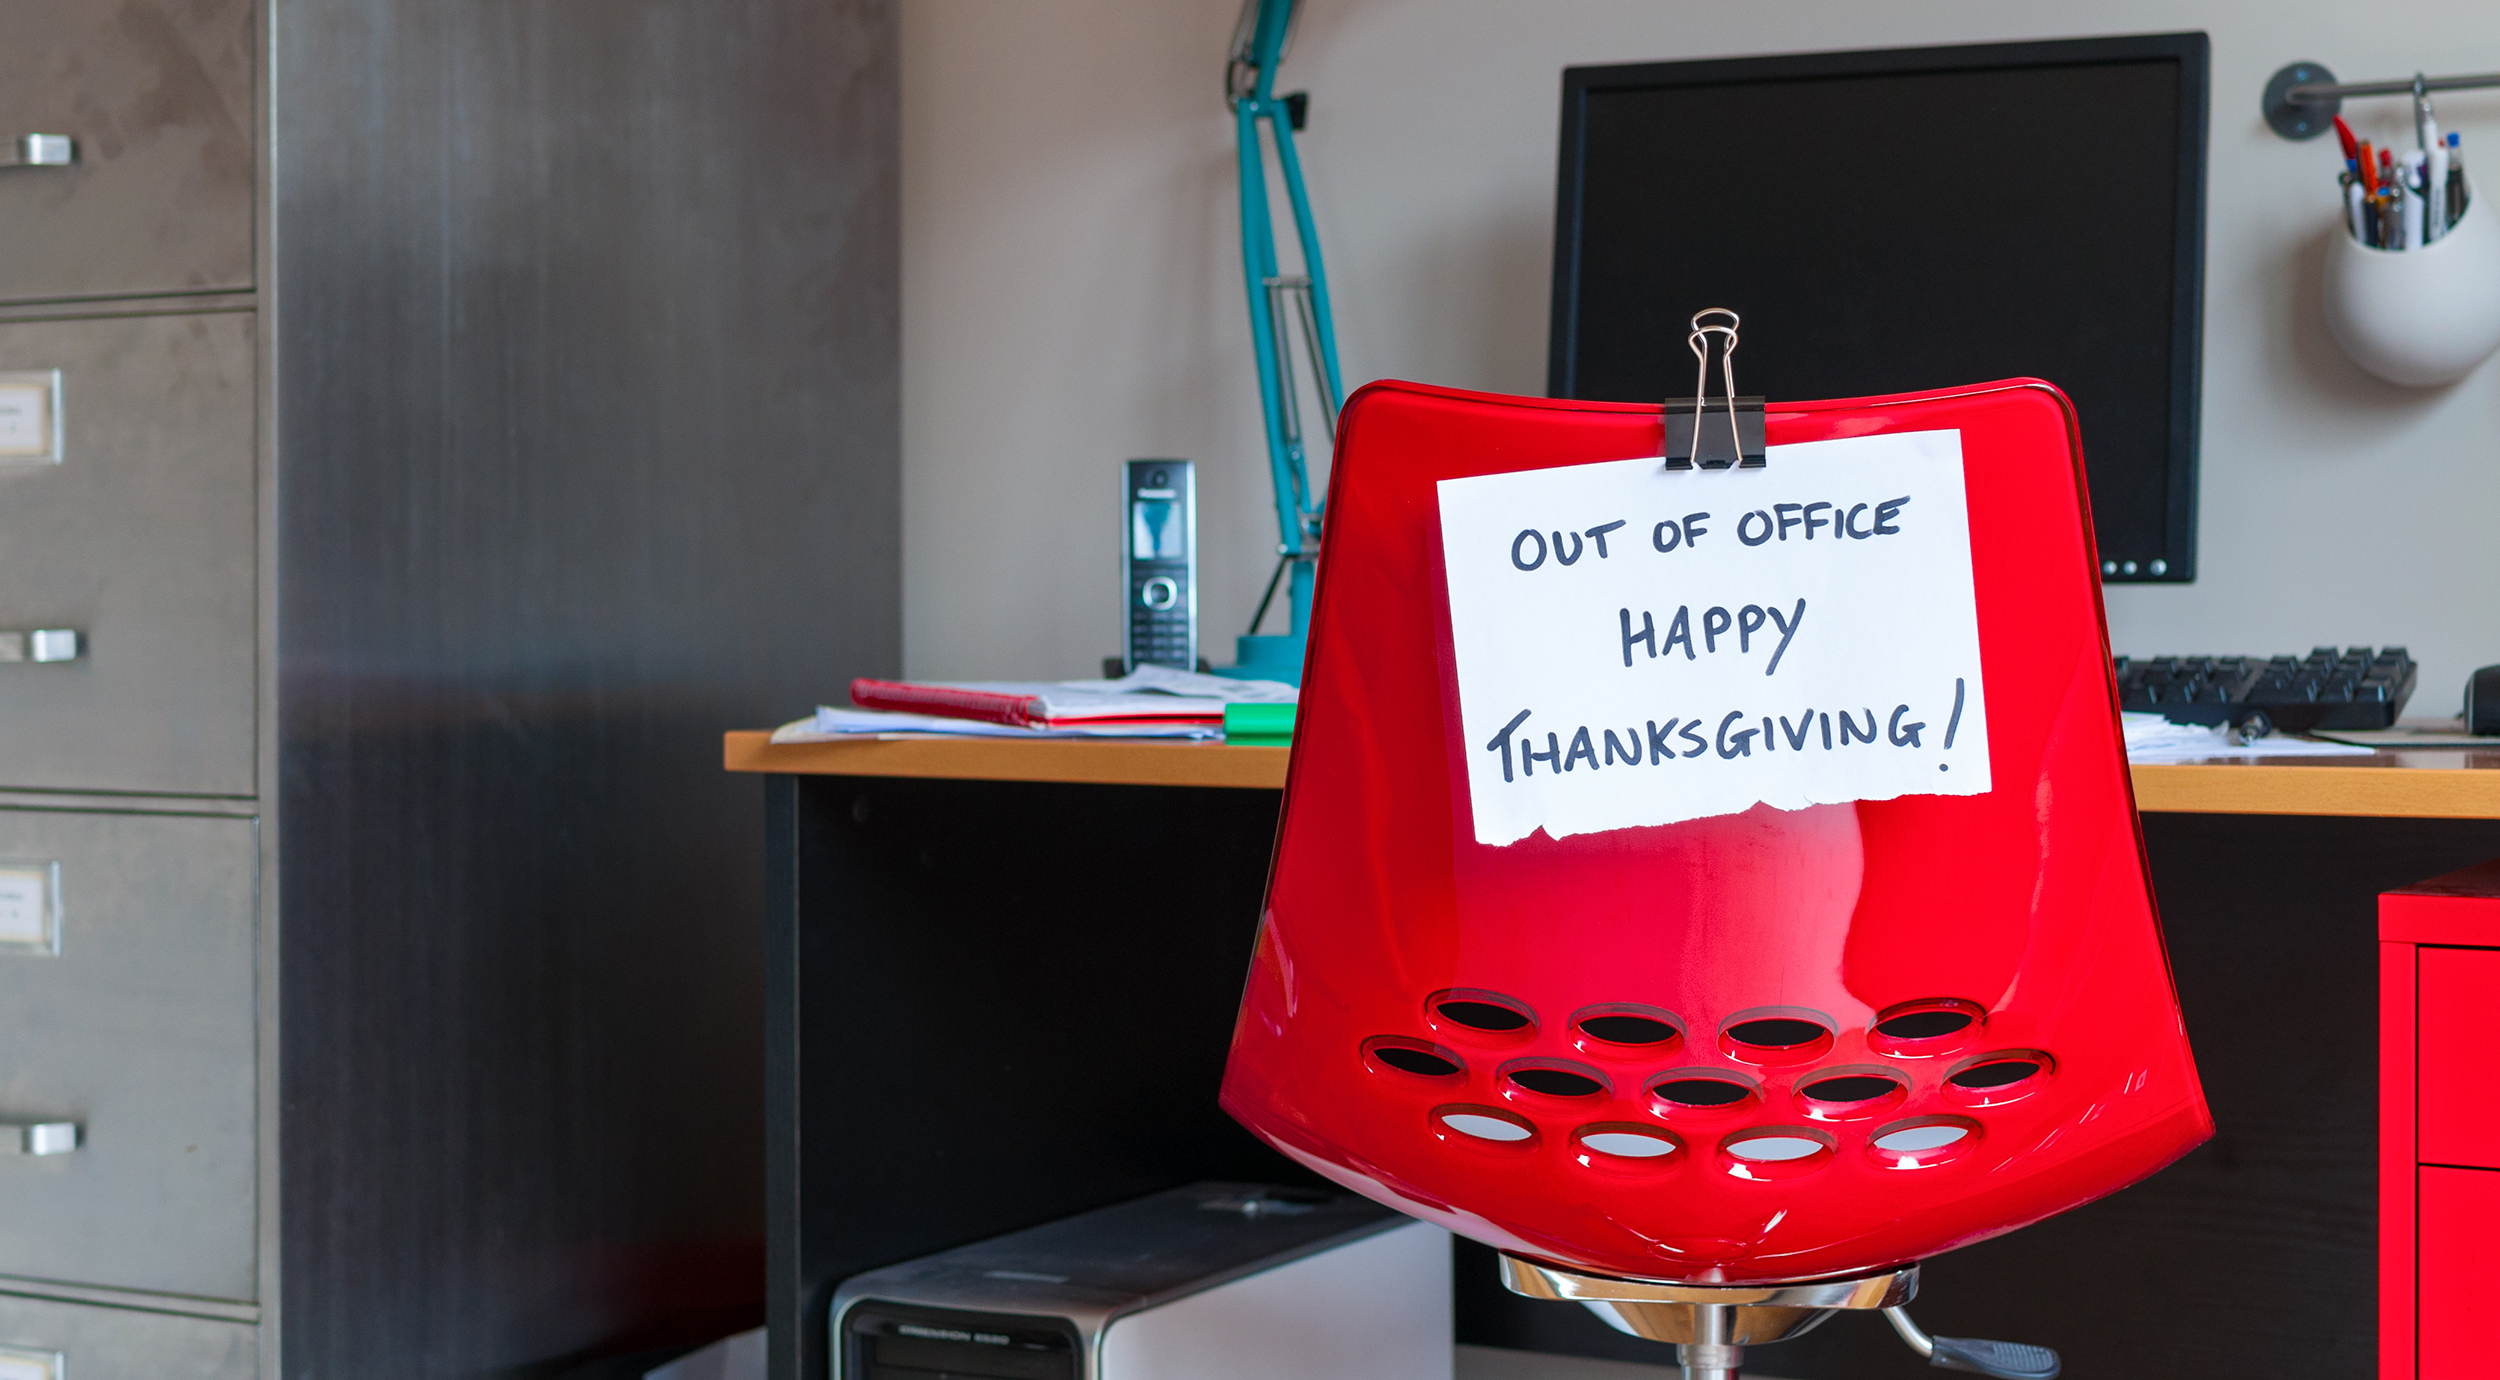 Employee leaves note on back of office chair: Out of Office. Happy Thanksgiving!